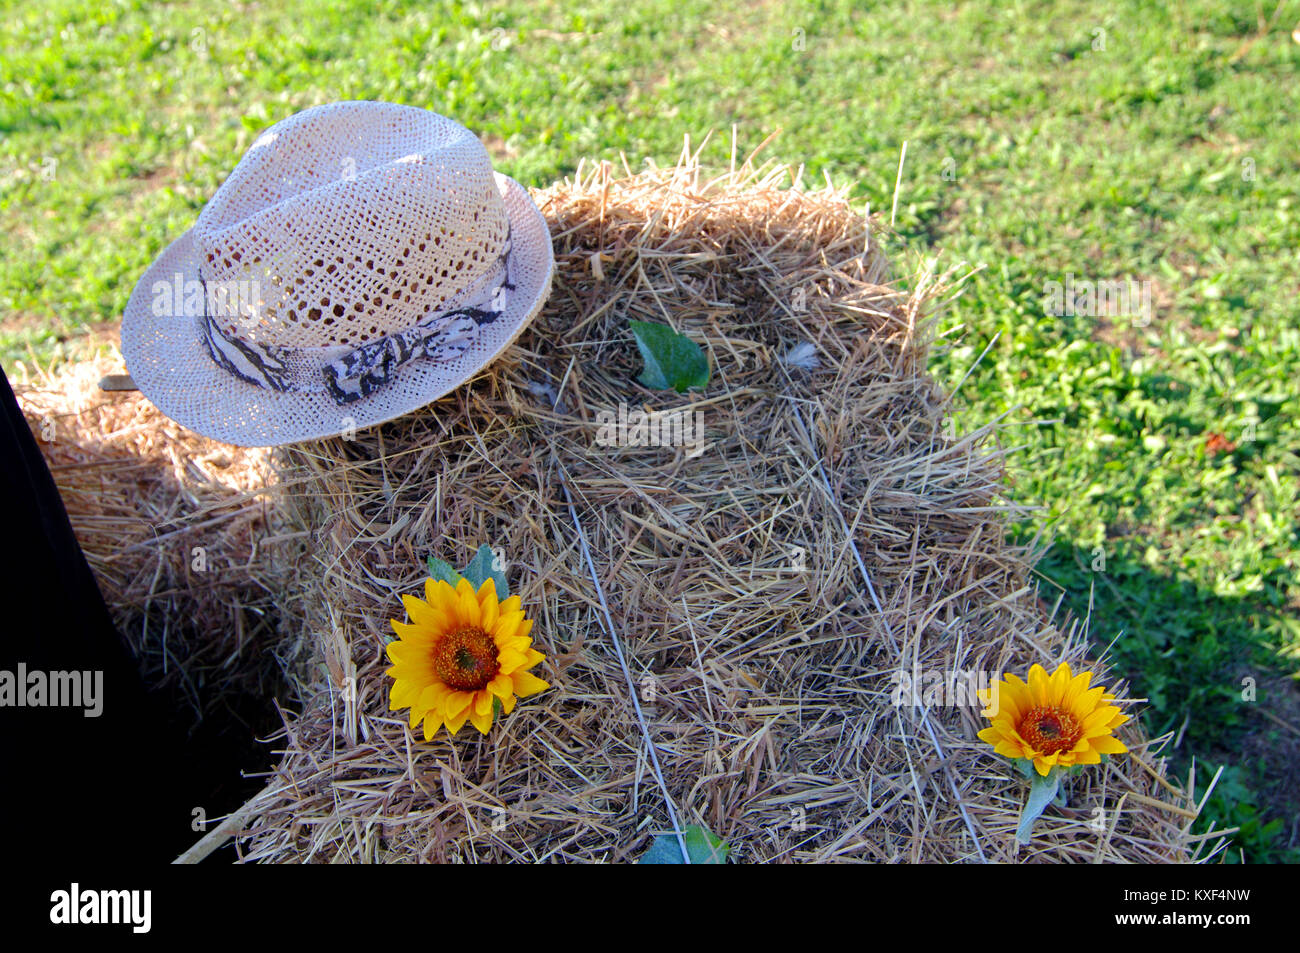 countryside image with peasant straw hat and sunflowers resting on hay Stock Photo